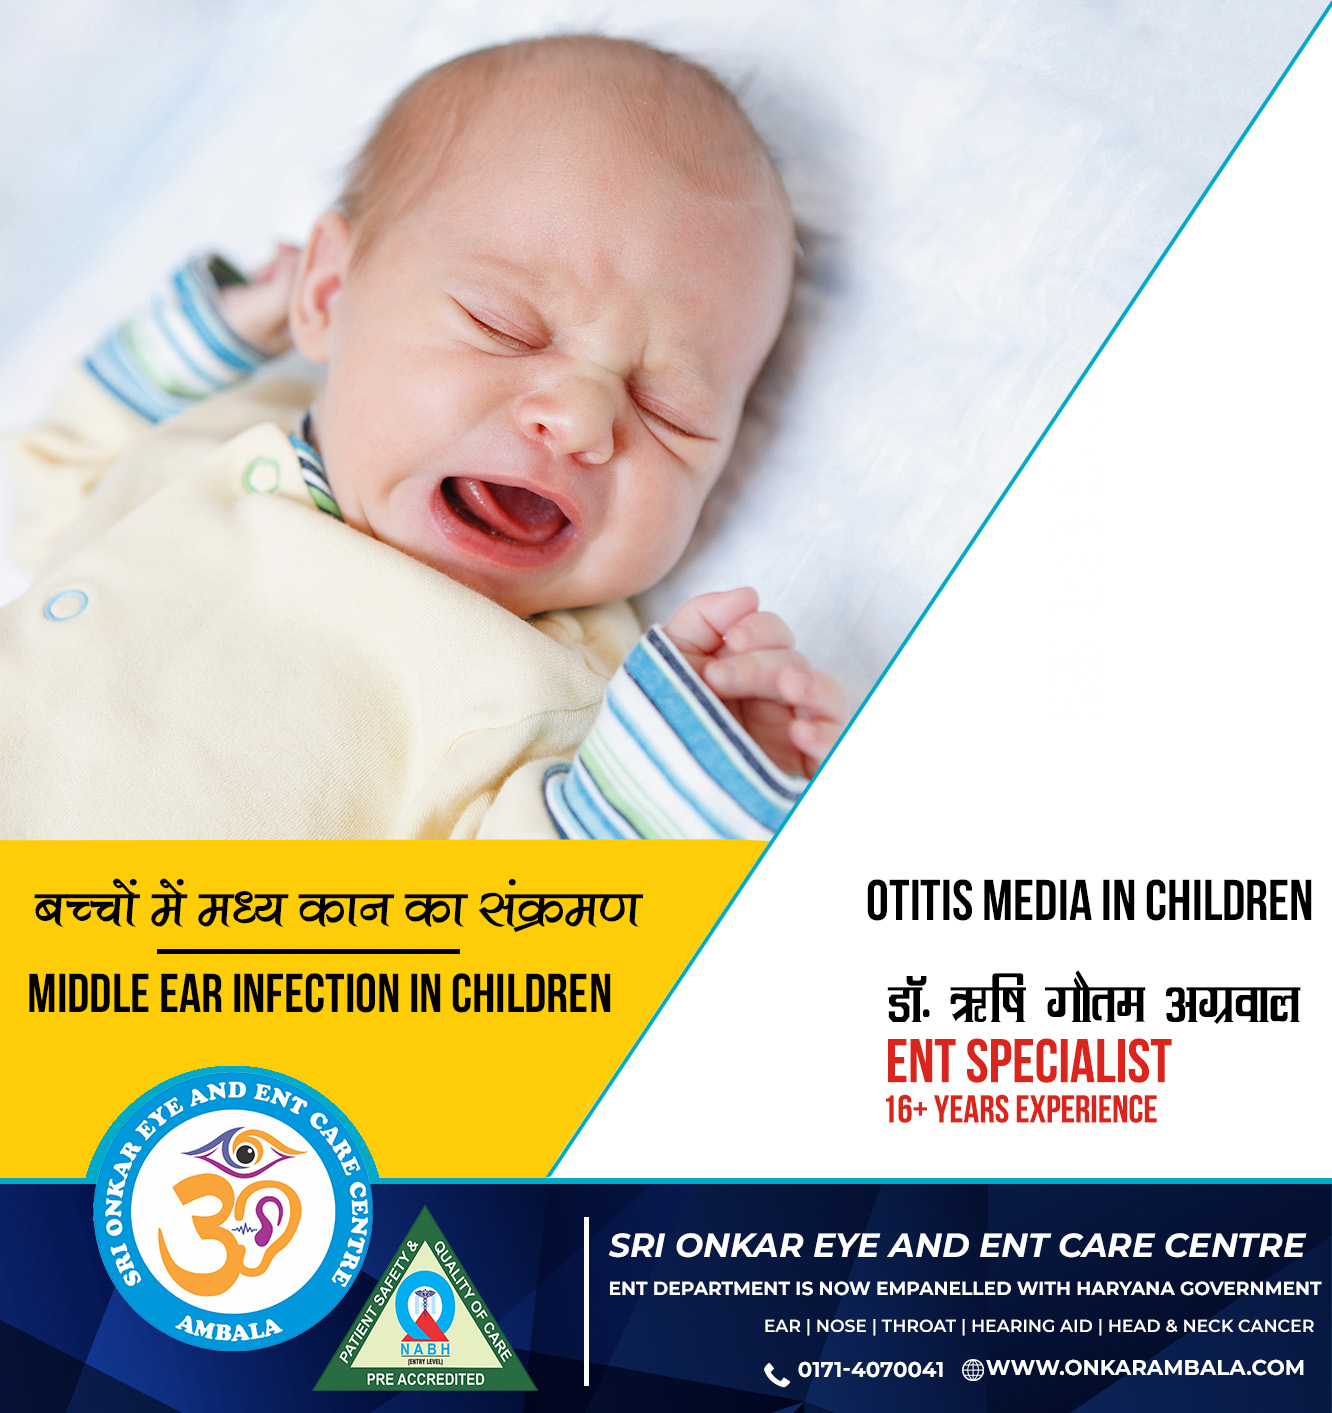 Otitis Media in Children | Middle ear infection in infants | Middle ear infection in children | Sri Onkar Eye & ENT Care Centre | Ambala City